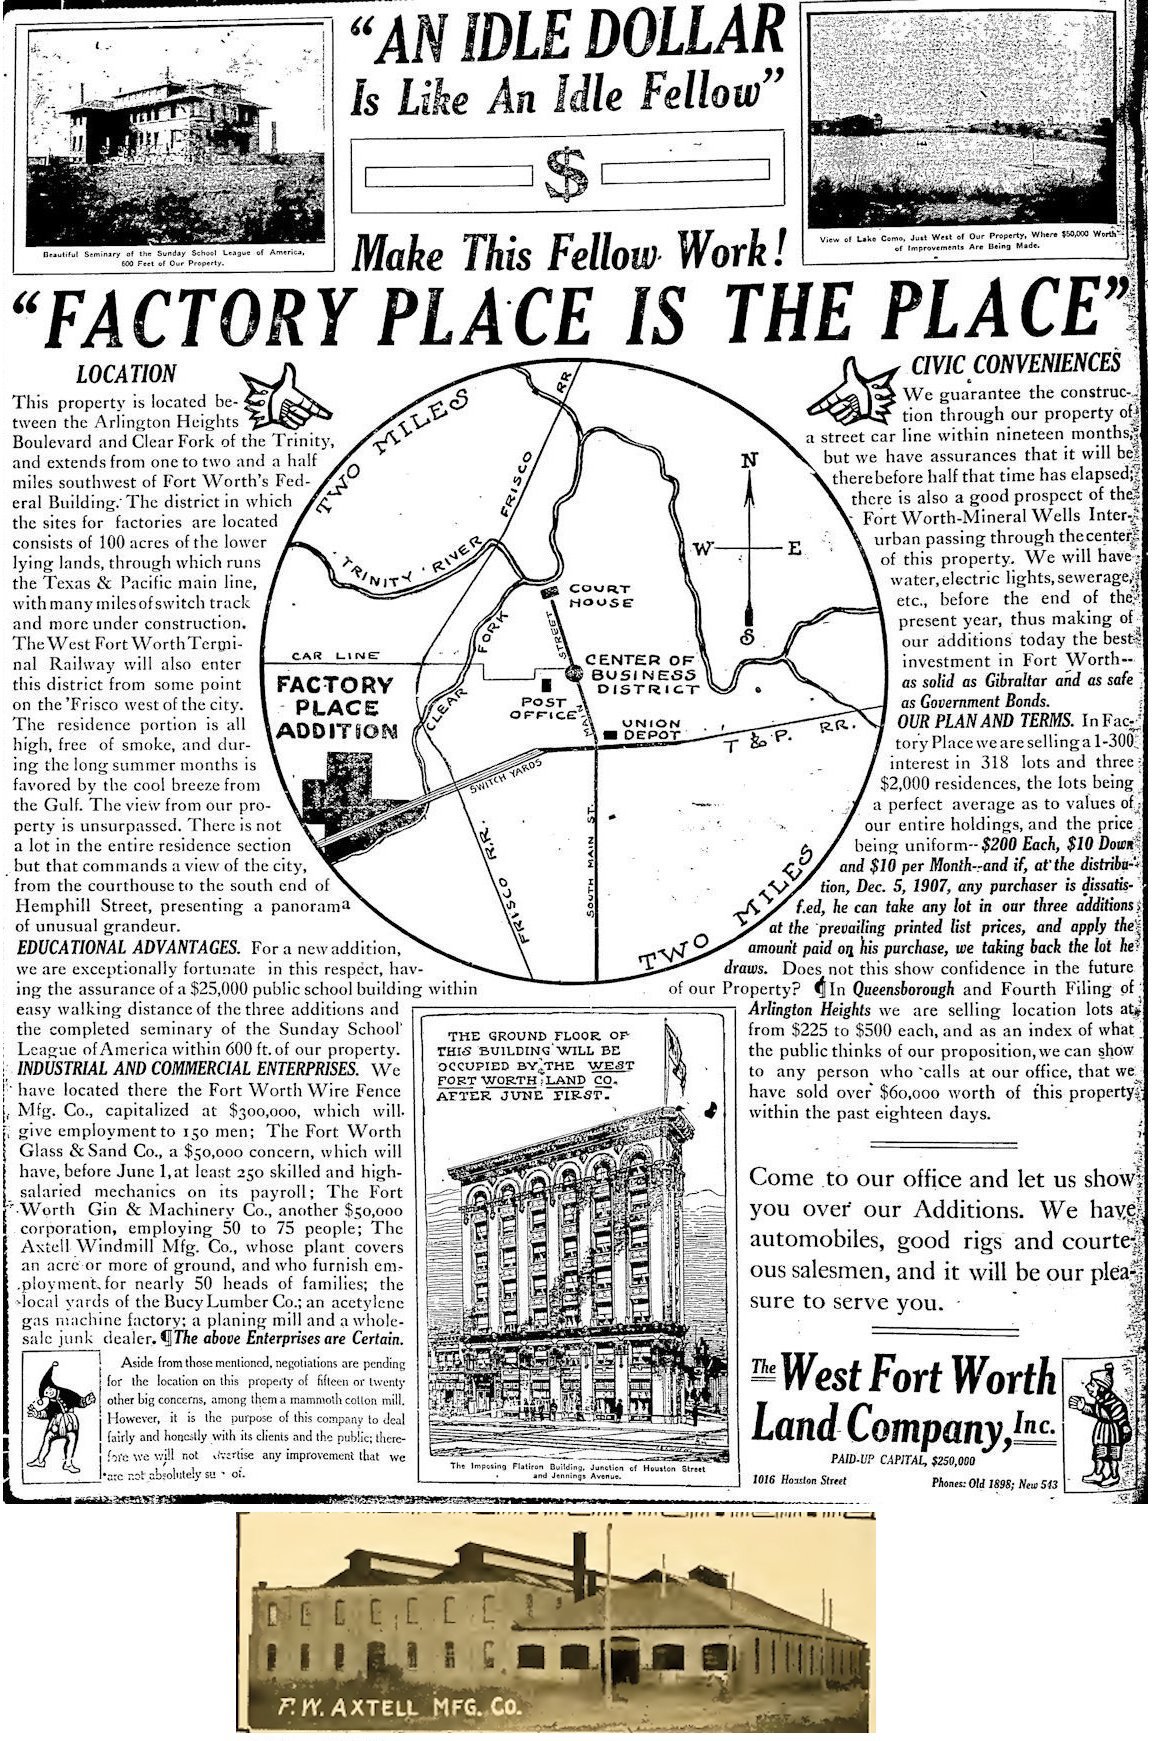 stove factory place ad 3-24-07 tele